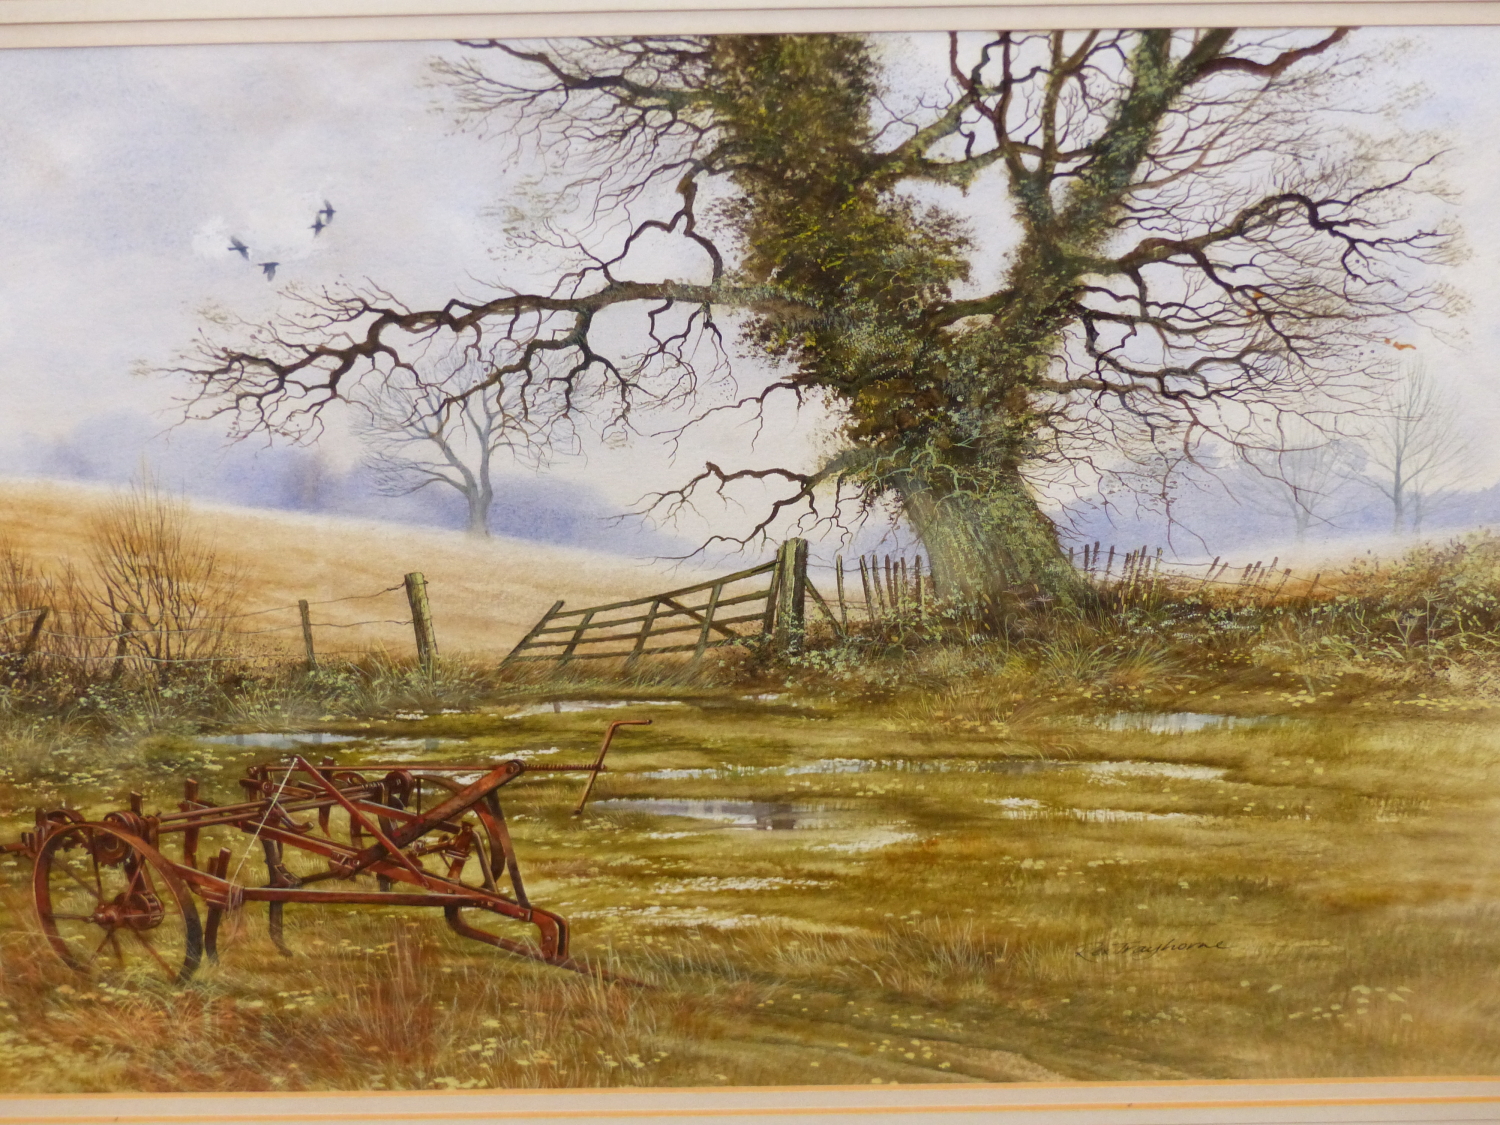 SIMON PARKIN. CONTEMPORARY. ARR. THE STABLE, SIGNED WATERCOLOUR. 49 x 74cms TOGETHER WITH THE OLD